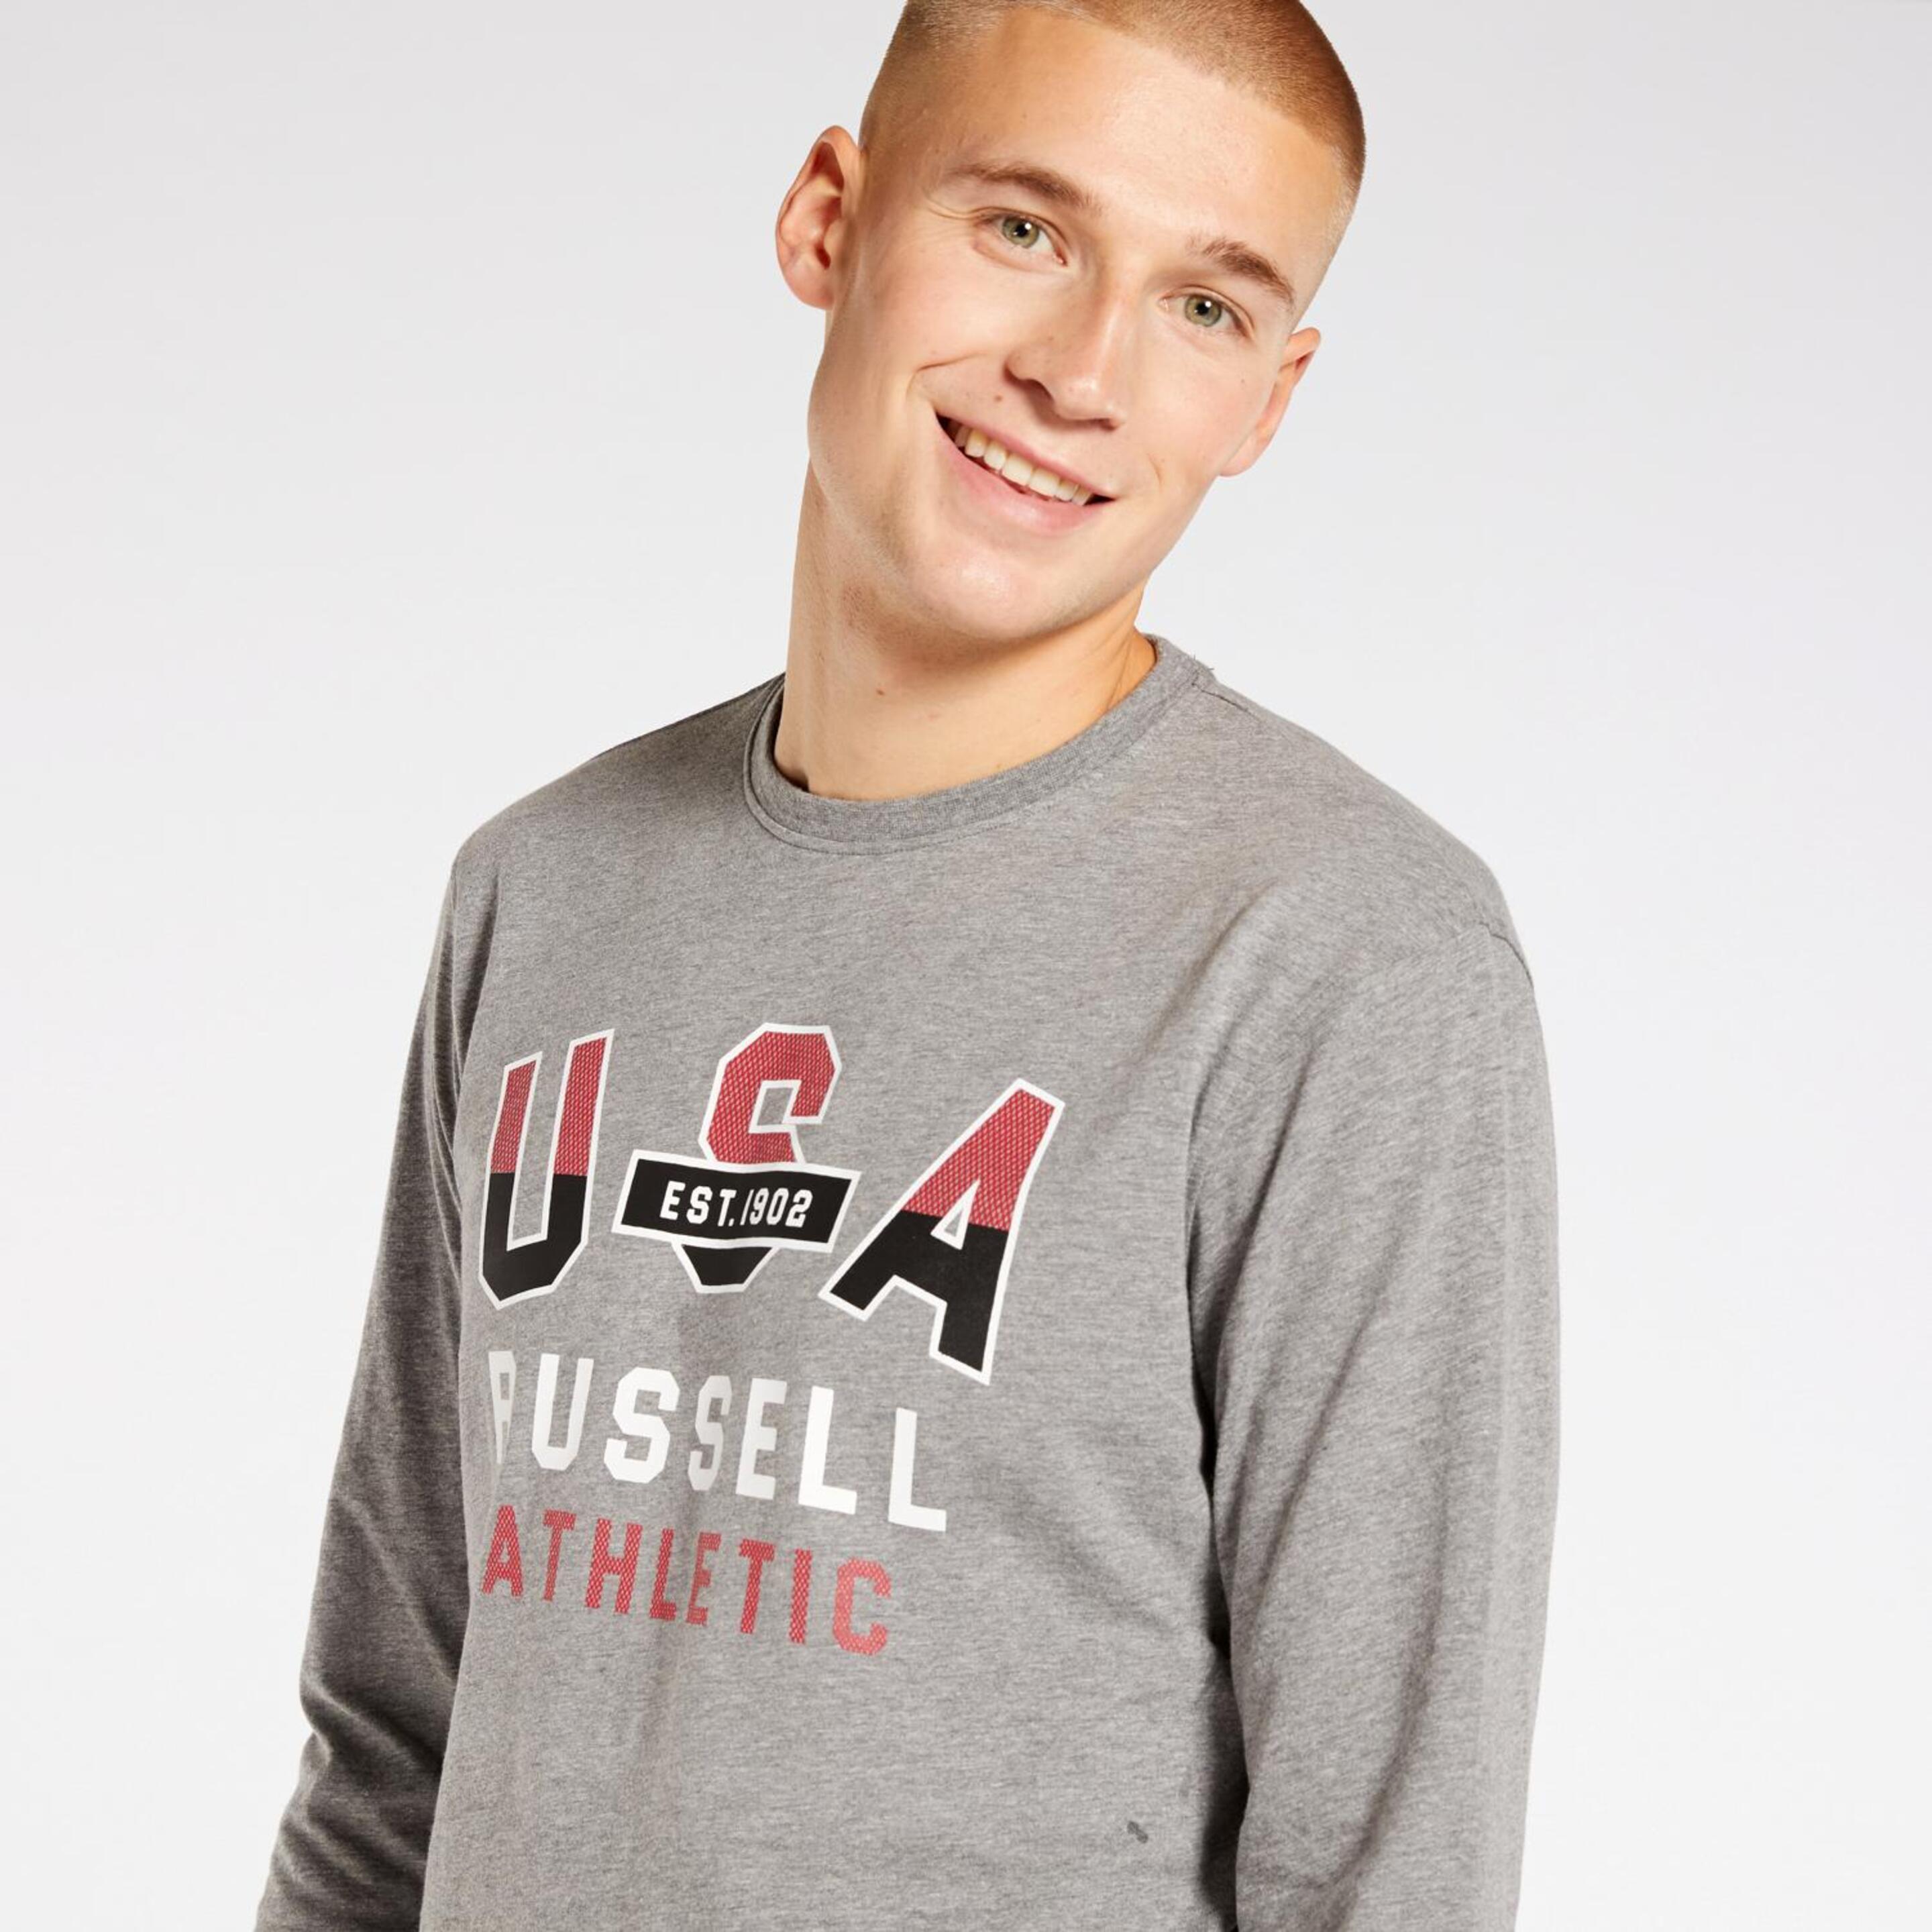 Camisola Russell Athletic Ra Logo